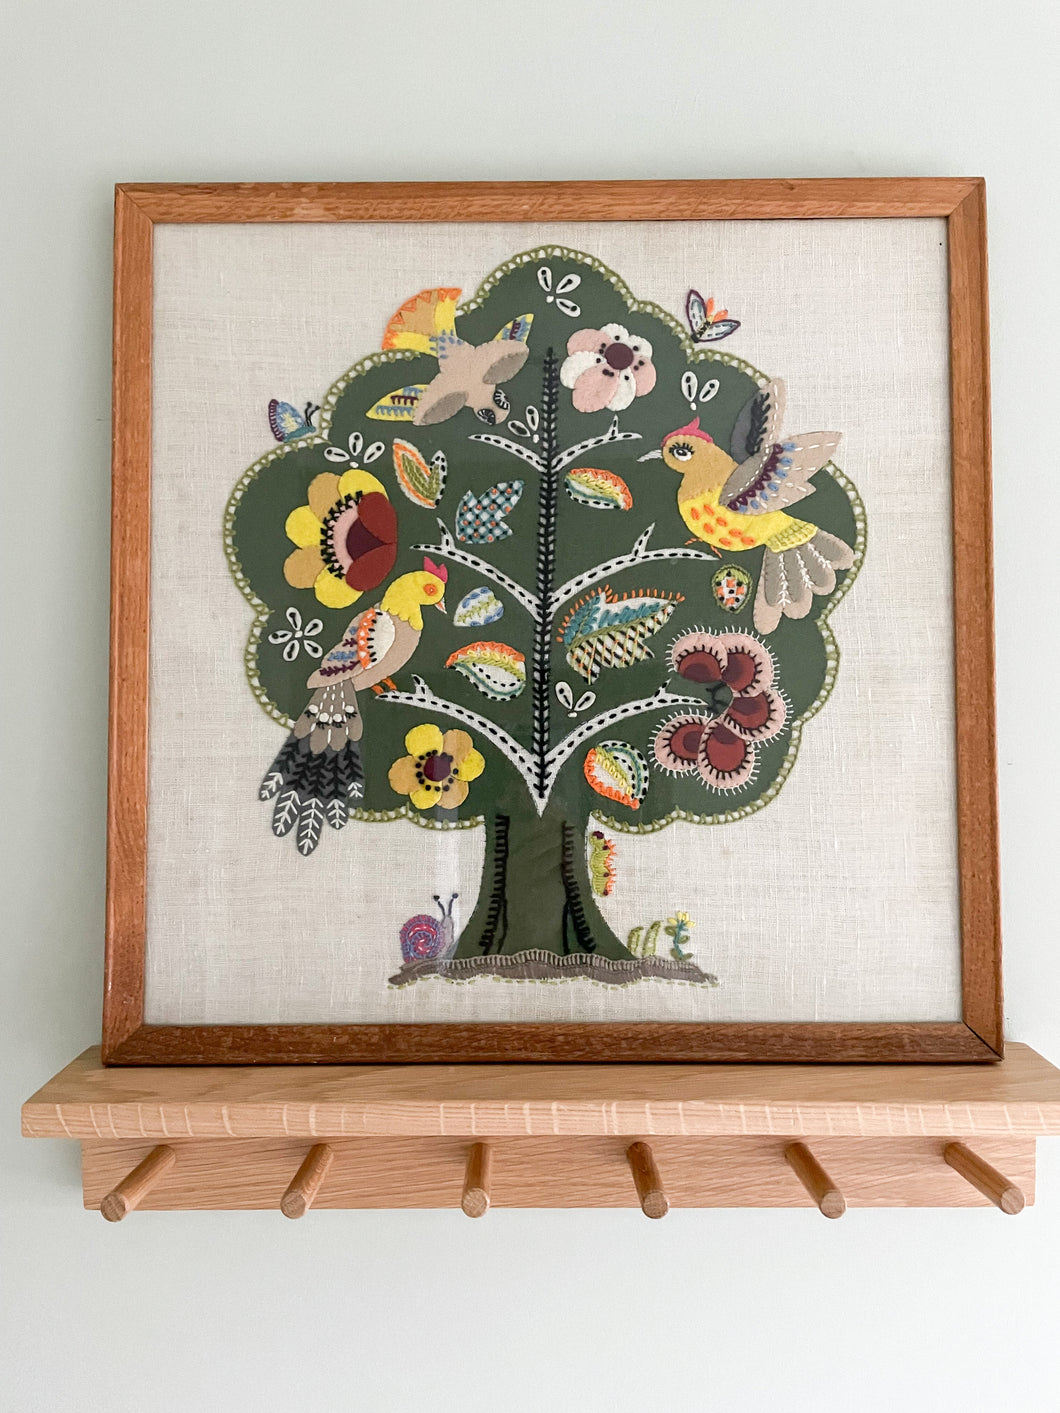 Vintage 1970s felt and hand-embroidered picture of a tree with birds and minibeasts - Moppet